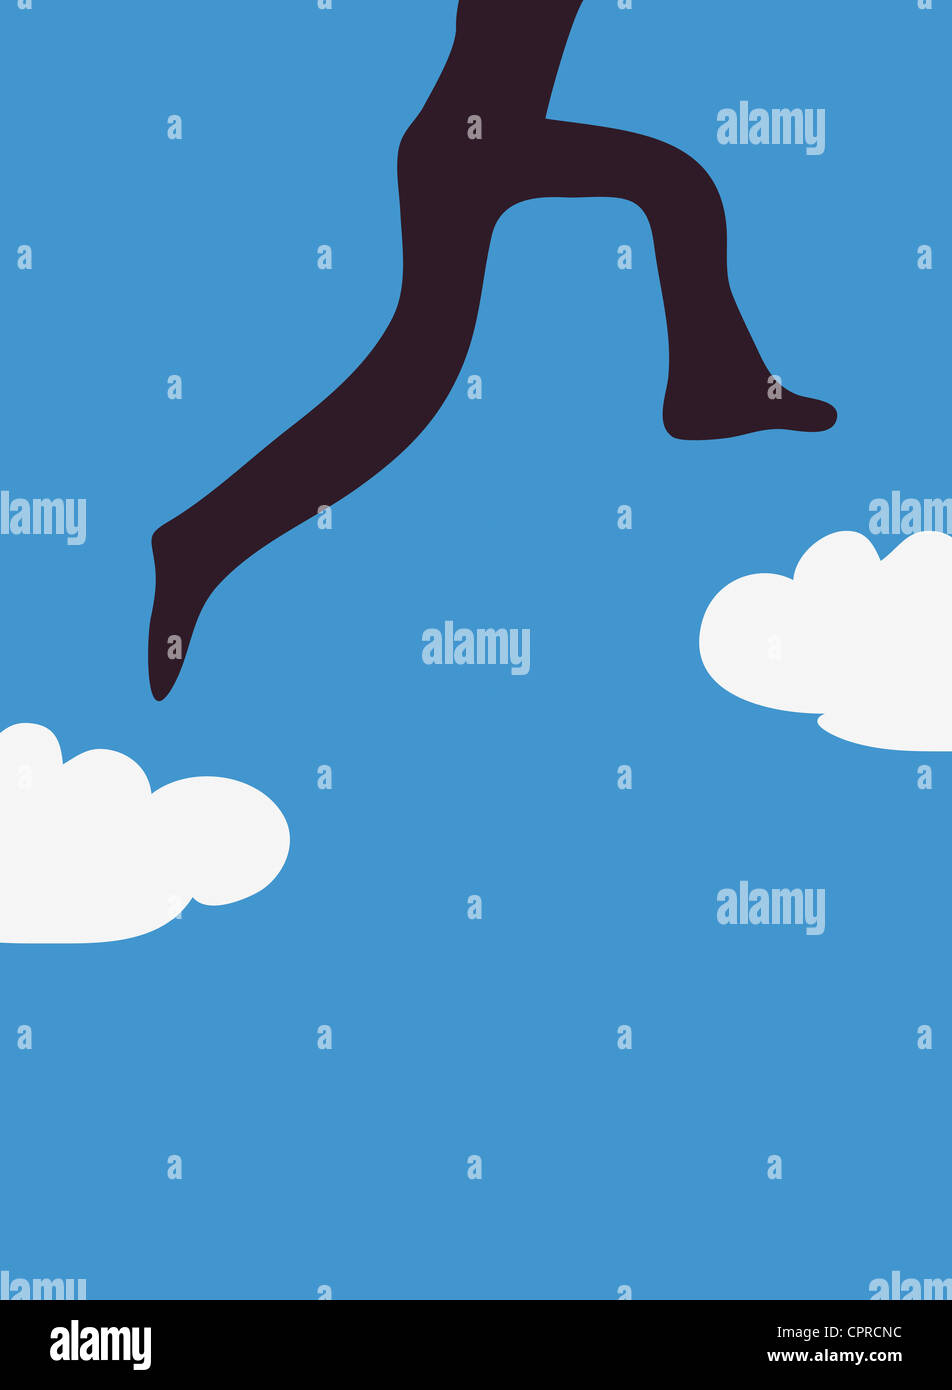 One successful person jumping between white clouds on a blue sky. Stock Photo